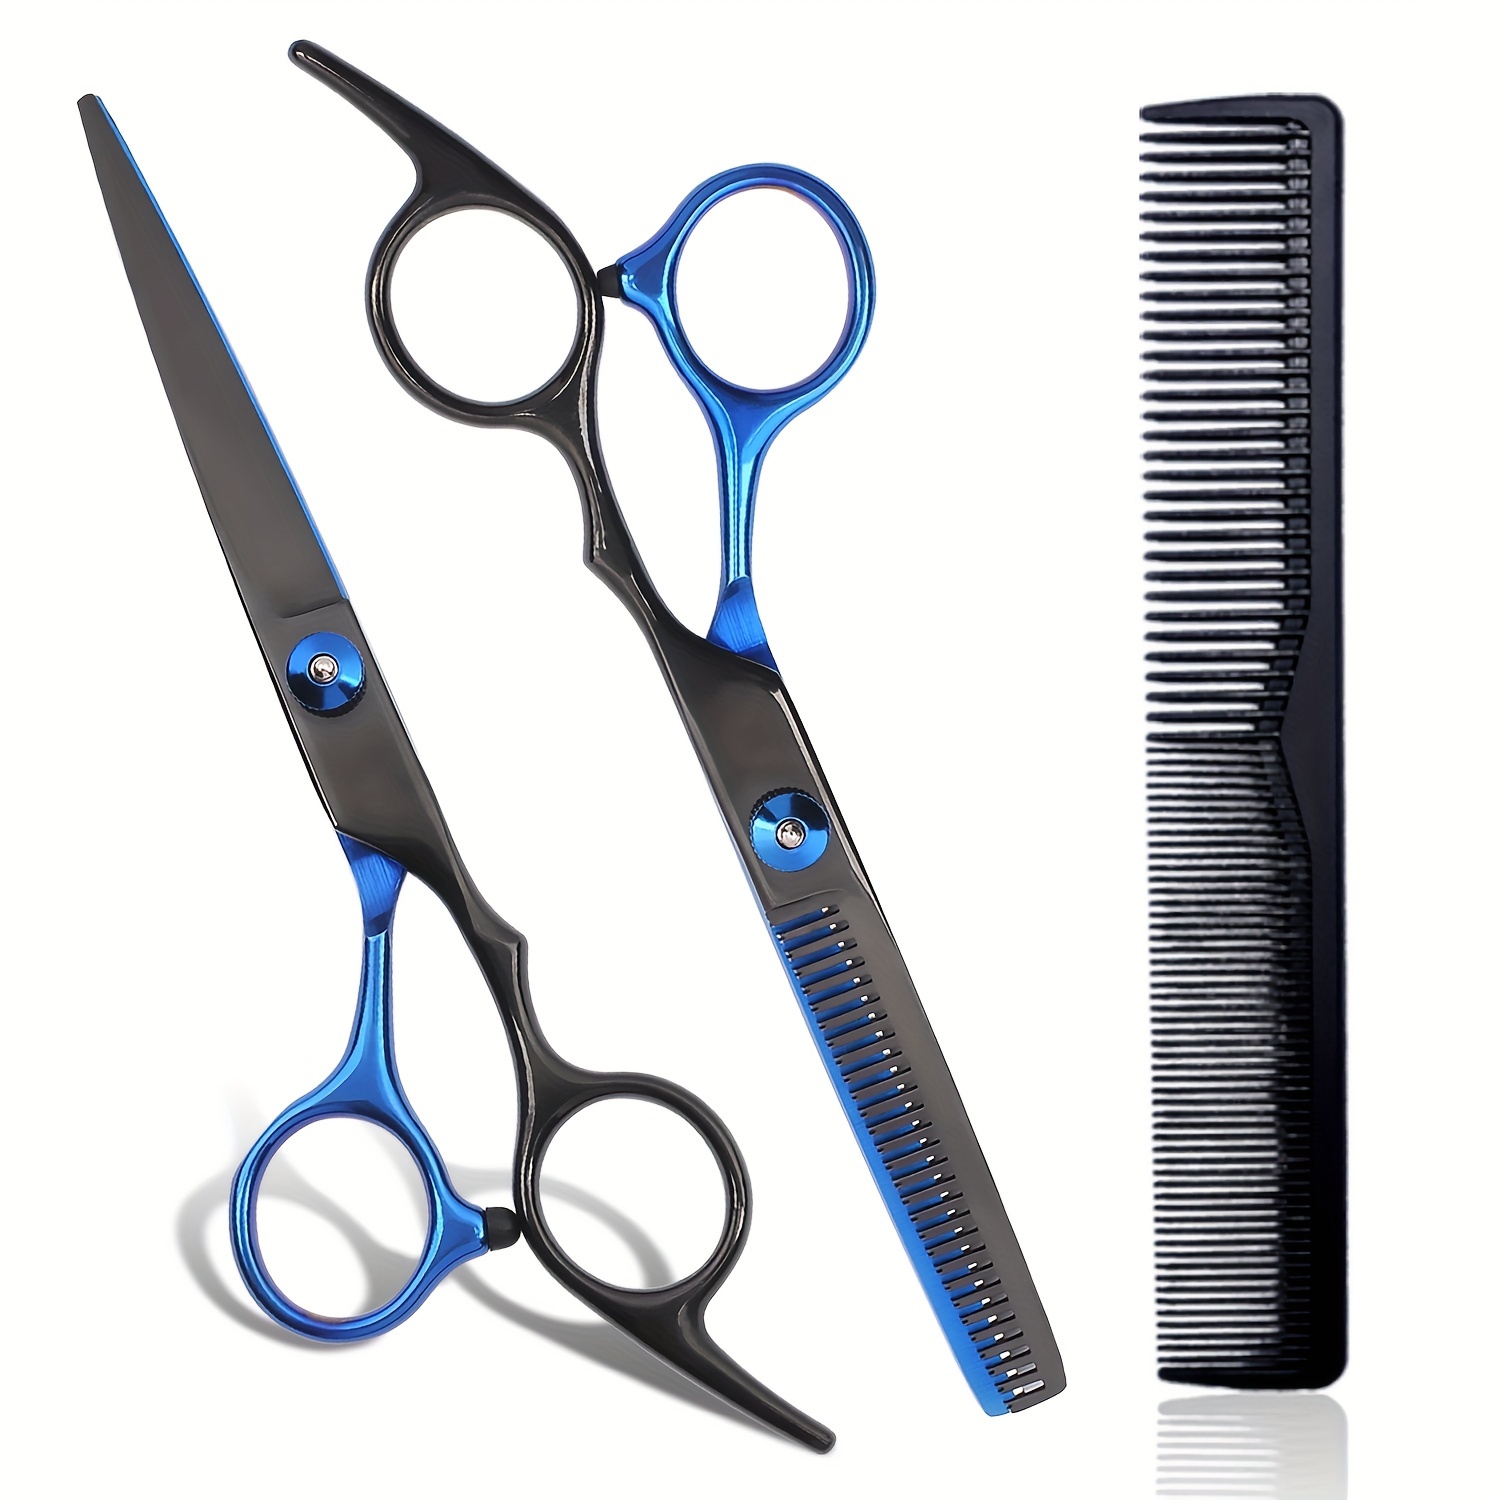 

Professional Hairdressing Scissors Set - 6 Inch Right Hand Shears For Texturizing, Normal & Relaxed Hair Types - Unisex-adult Barber Thinning & Cutting Accessories, Unscented, Handmade Sharp Blades